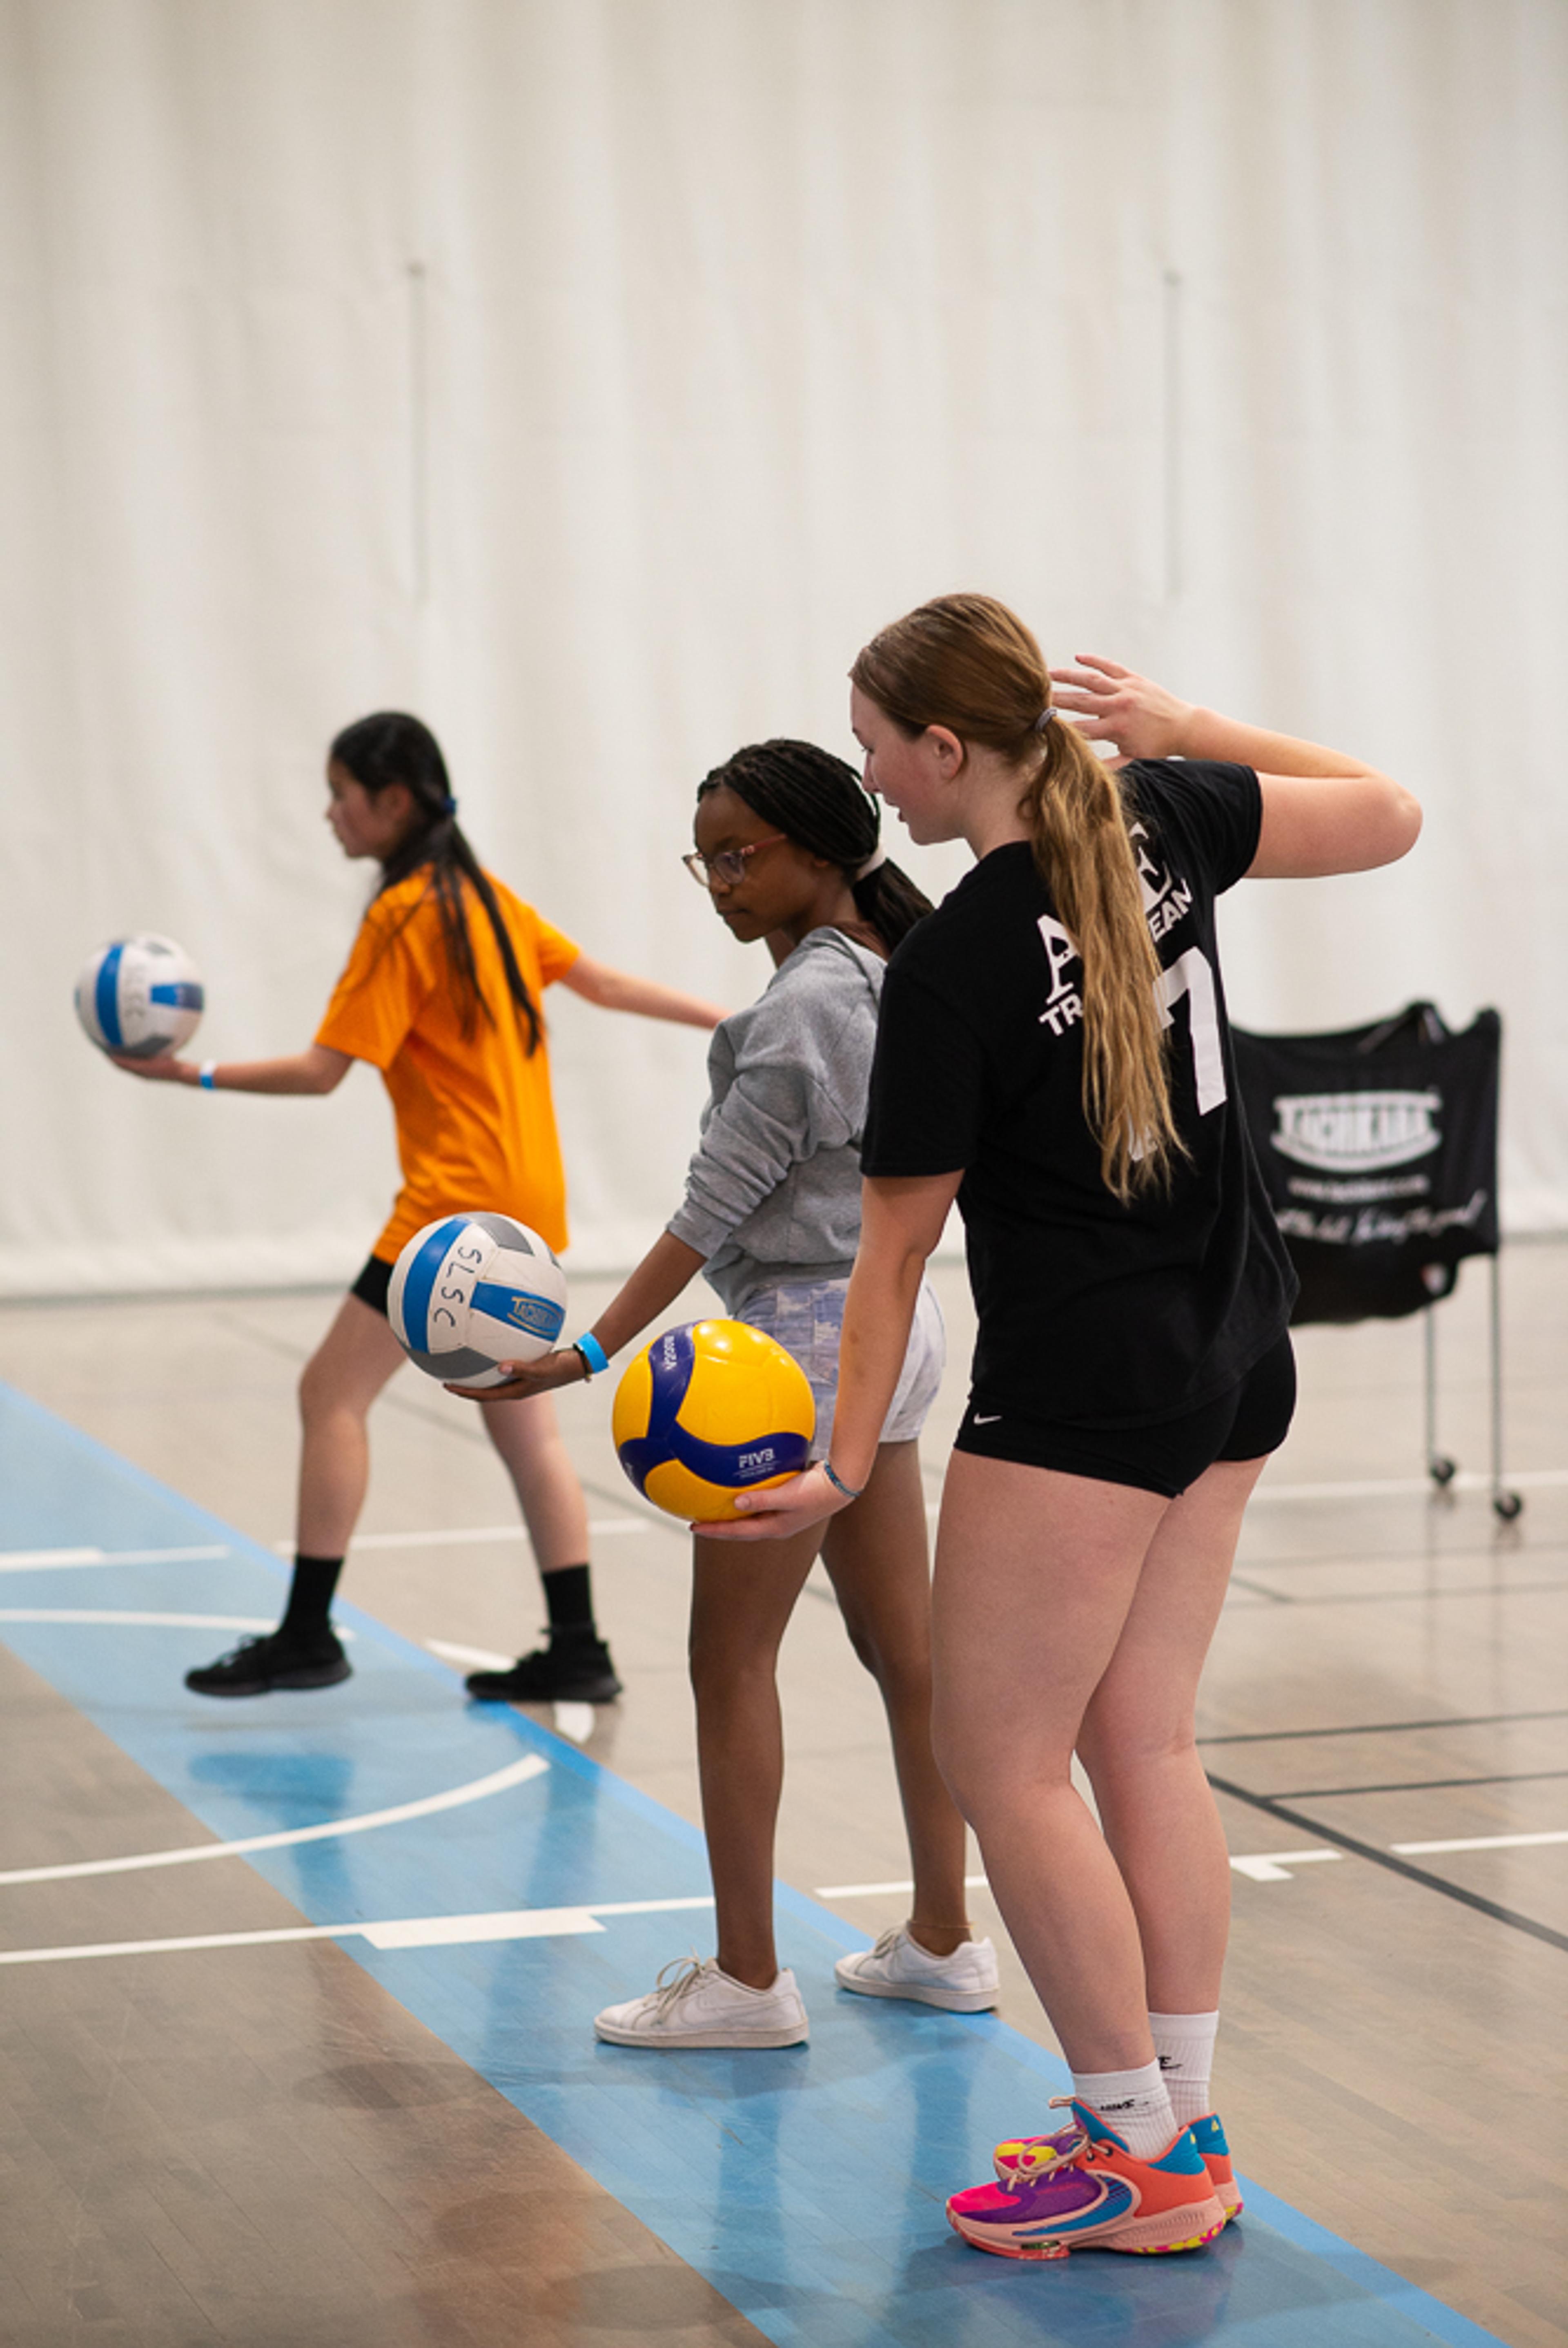 Young women being coached on serving a volleyball in a gymnasium.